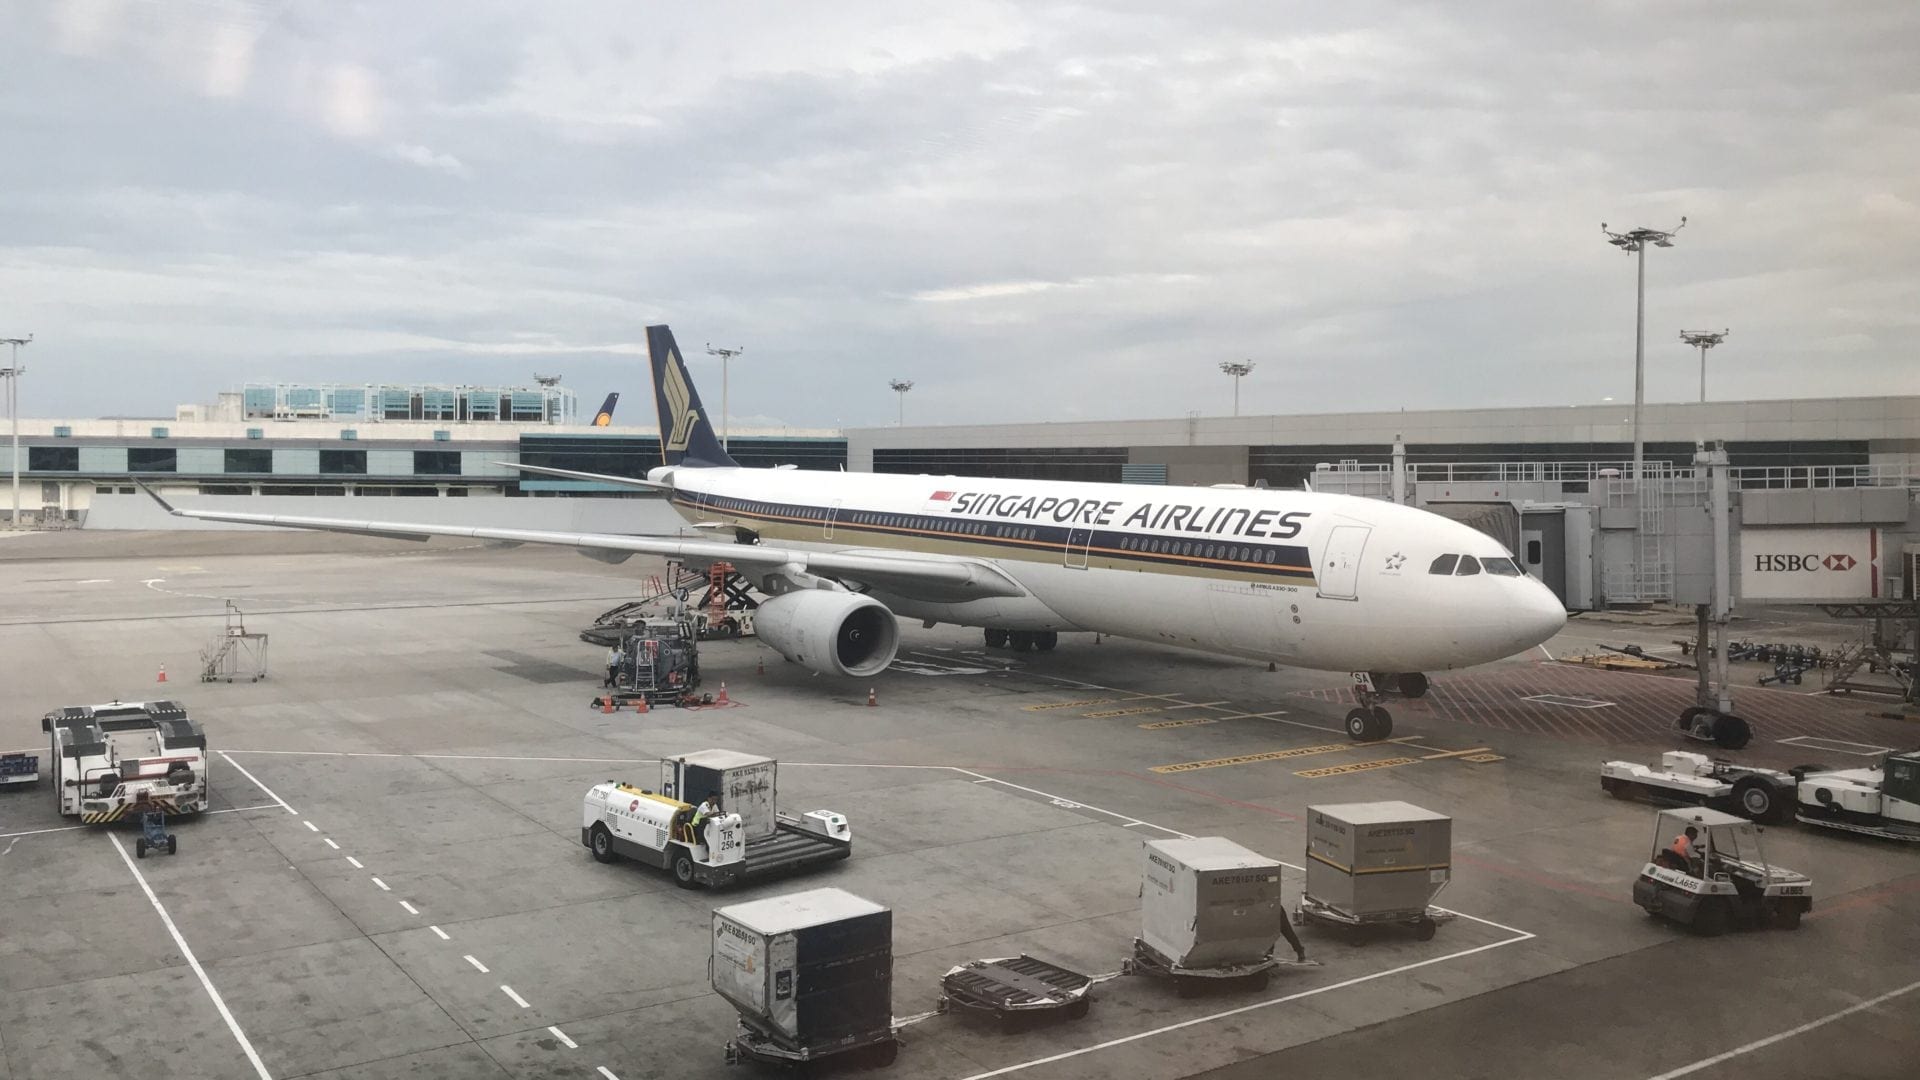 Singapore Airlines Airbus A330